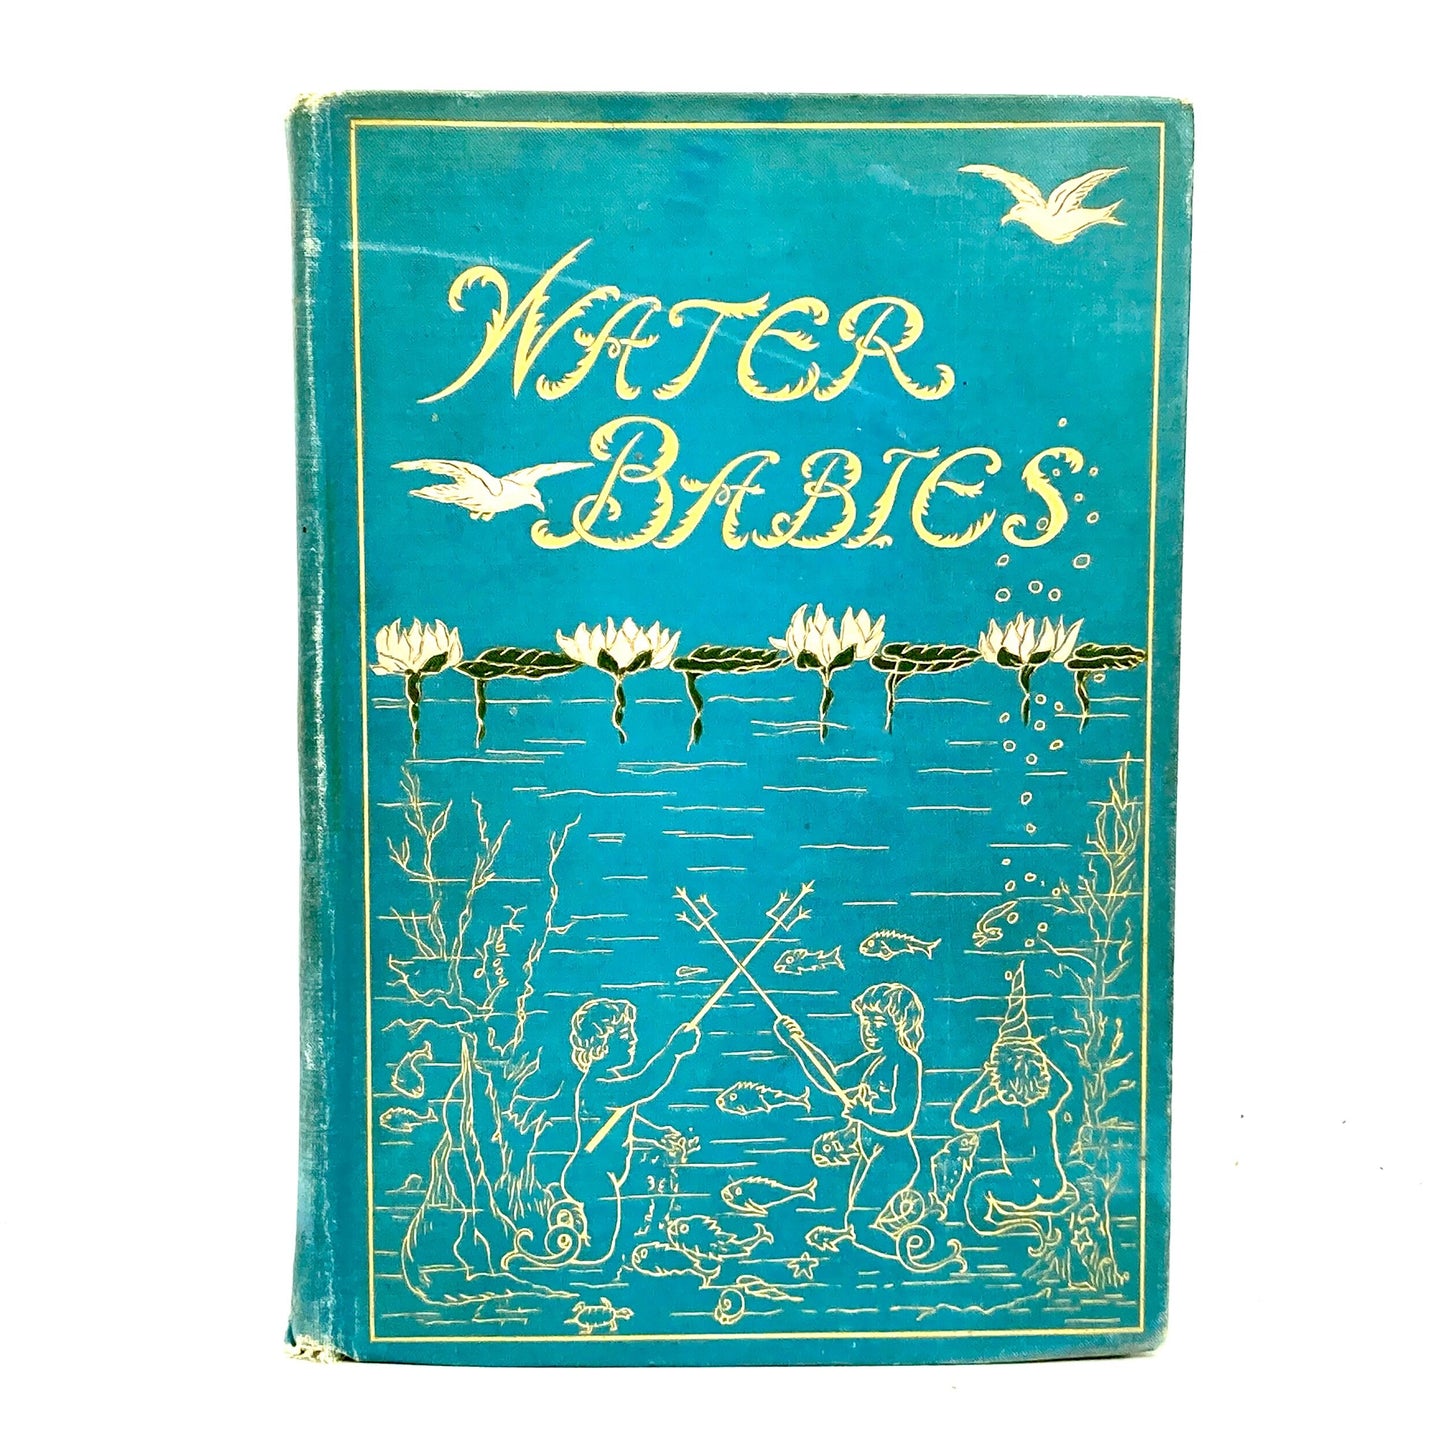 KINGSLEY, Charles "The Water Babies" [Rand, McNally & Co, 1900] - Buzz Bookstore